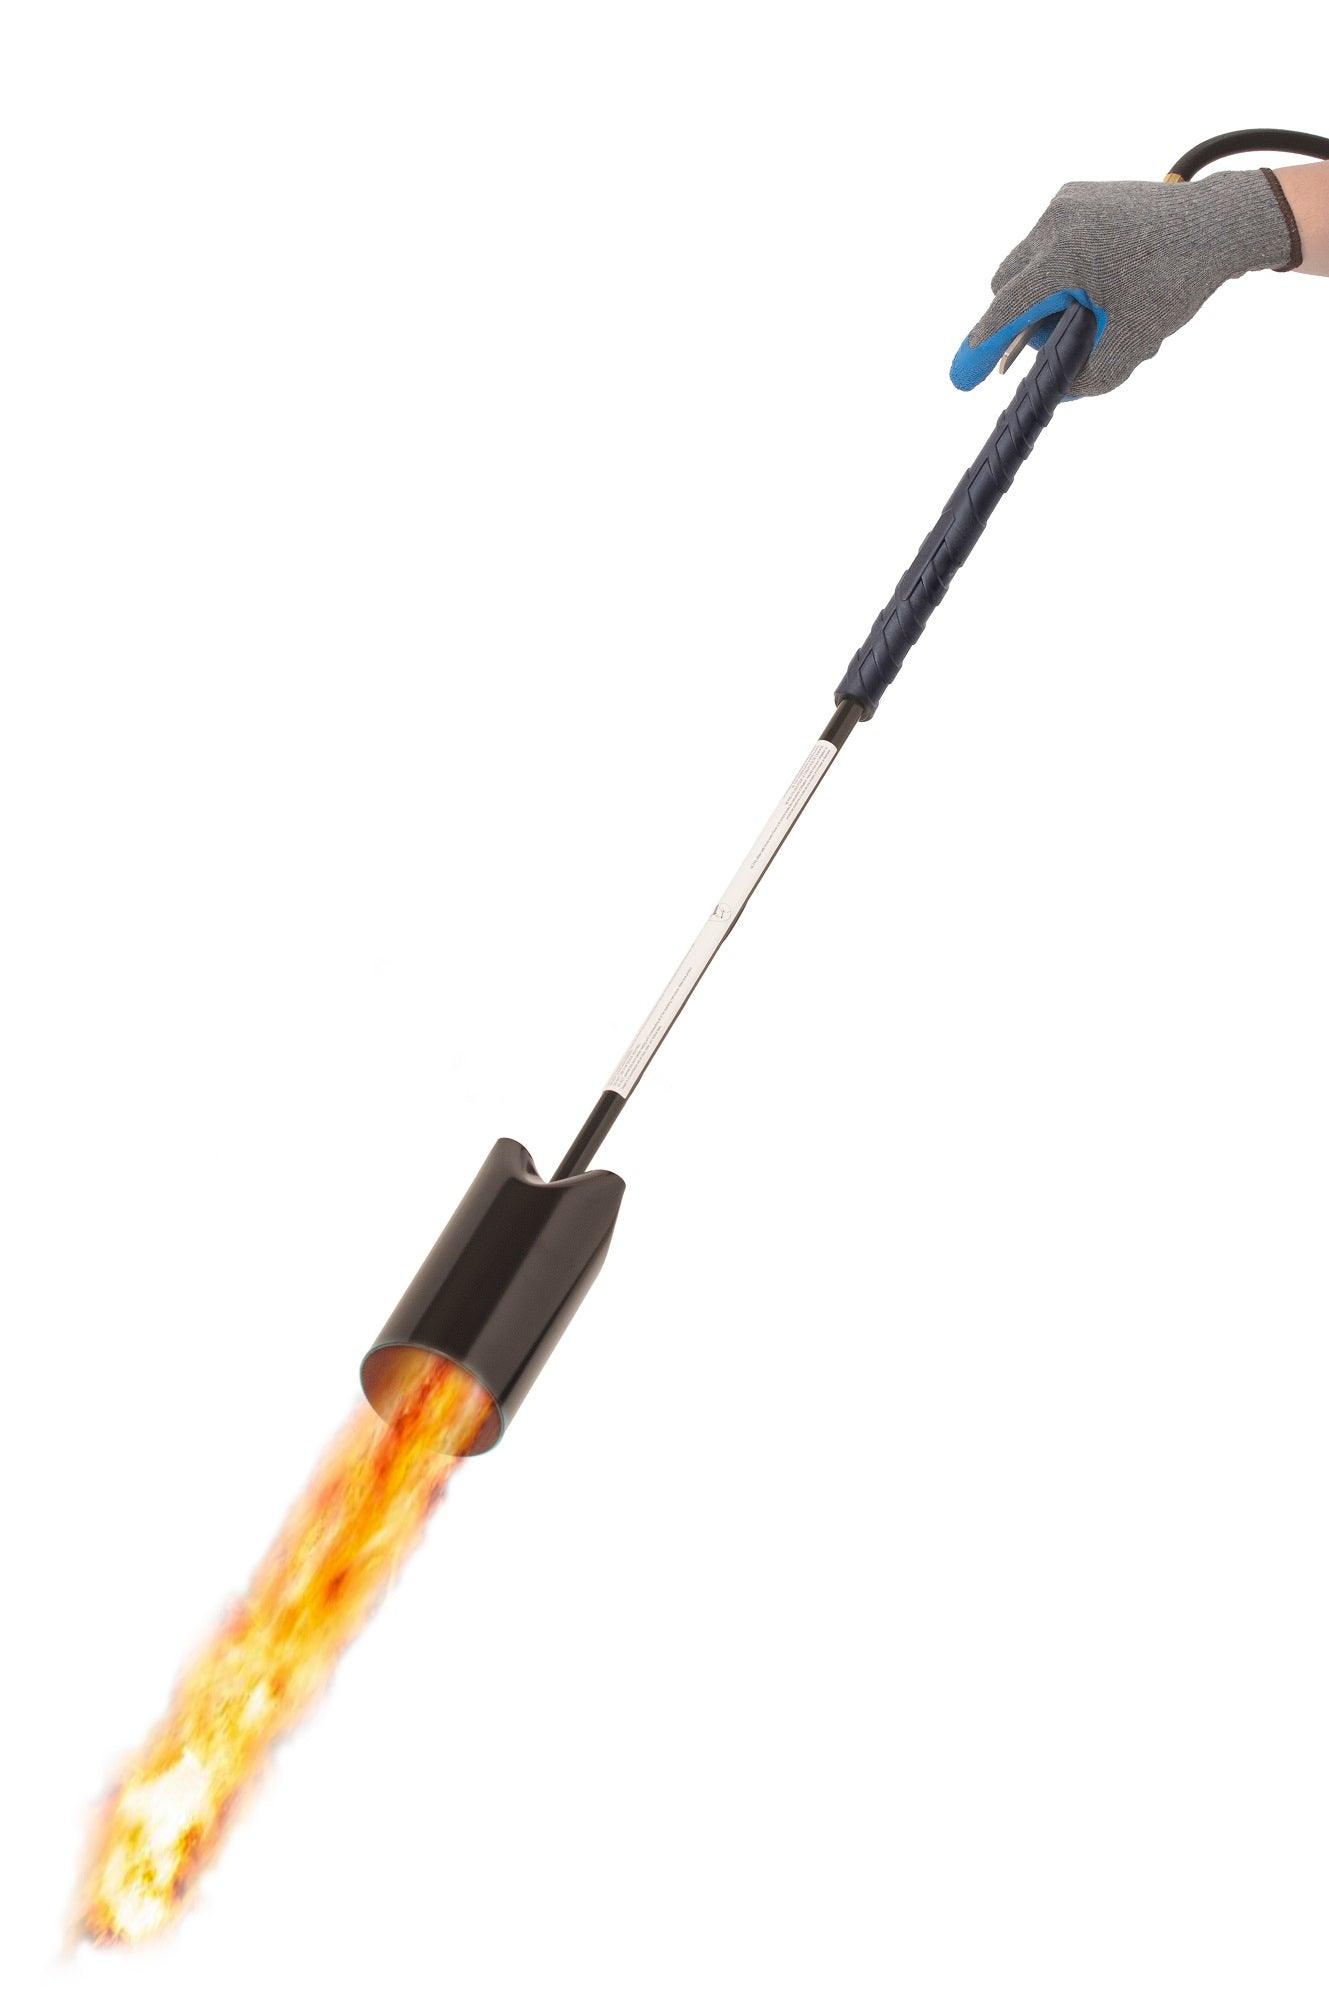 Flame King Heavy Duty Propane Torch Weed Burner with Flint Striker - Flame King